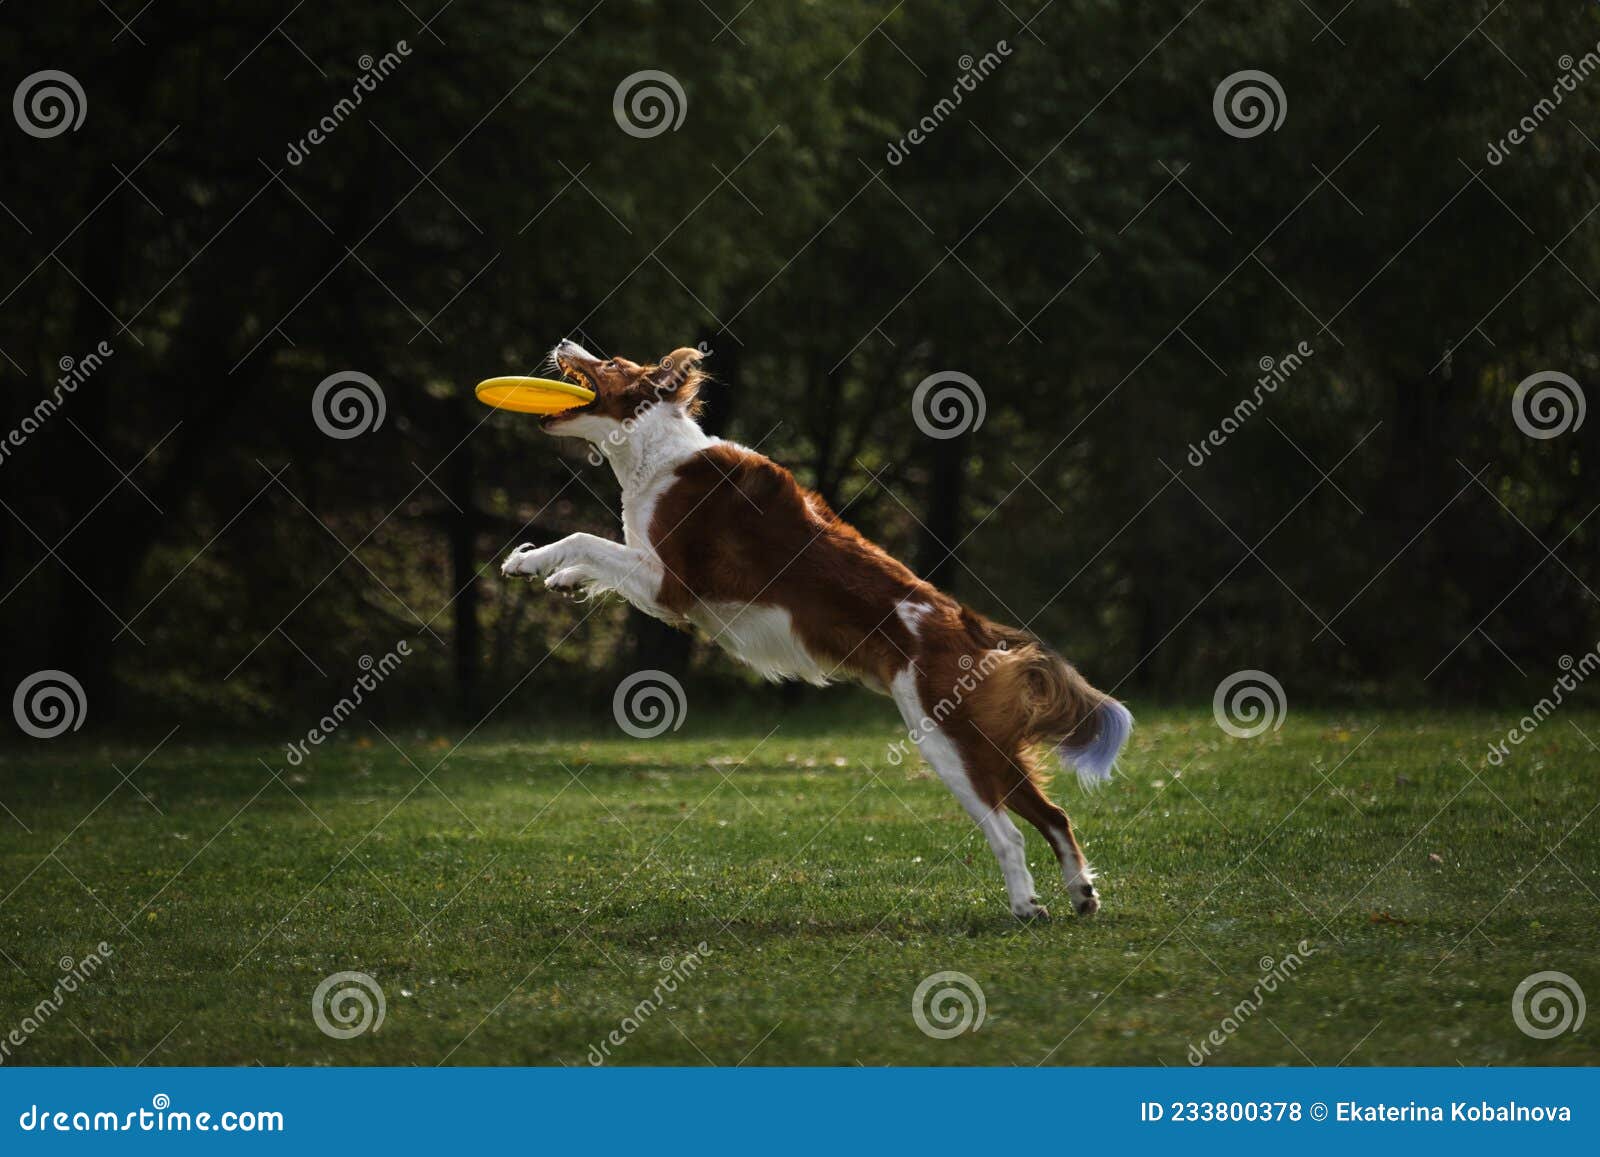 competitions and sports with dog in fresh air on green field. fluffy border collie of reddish white sable color jumps high and